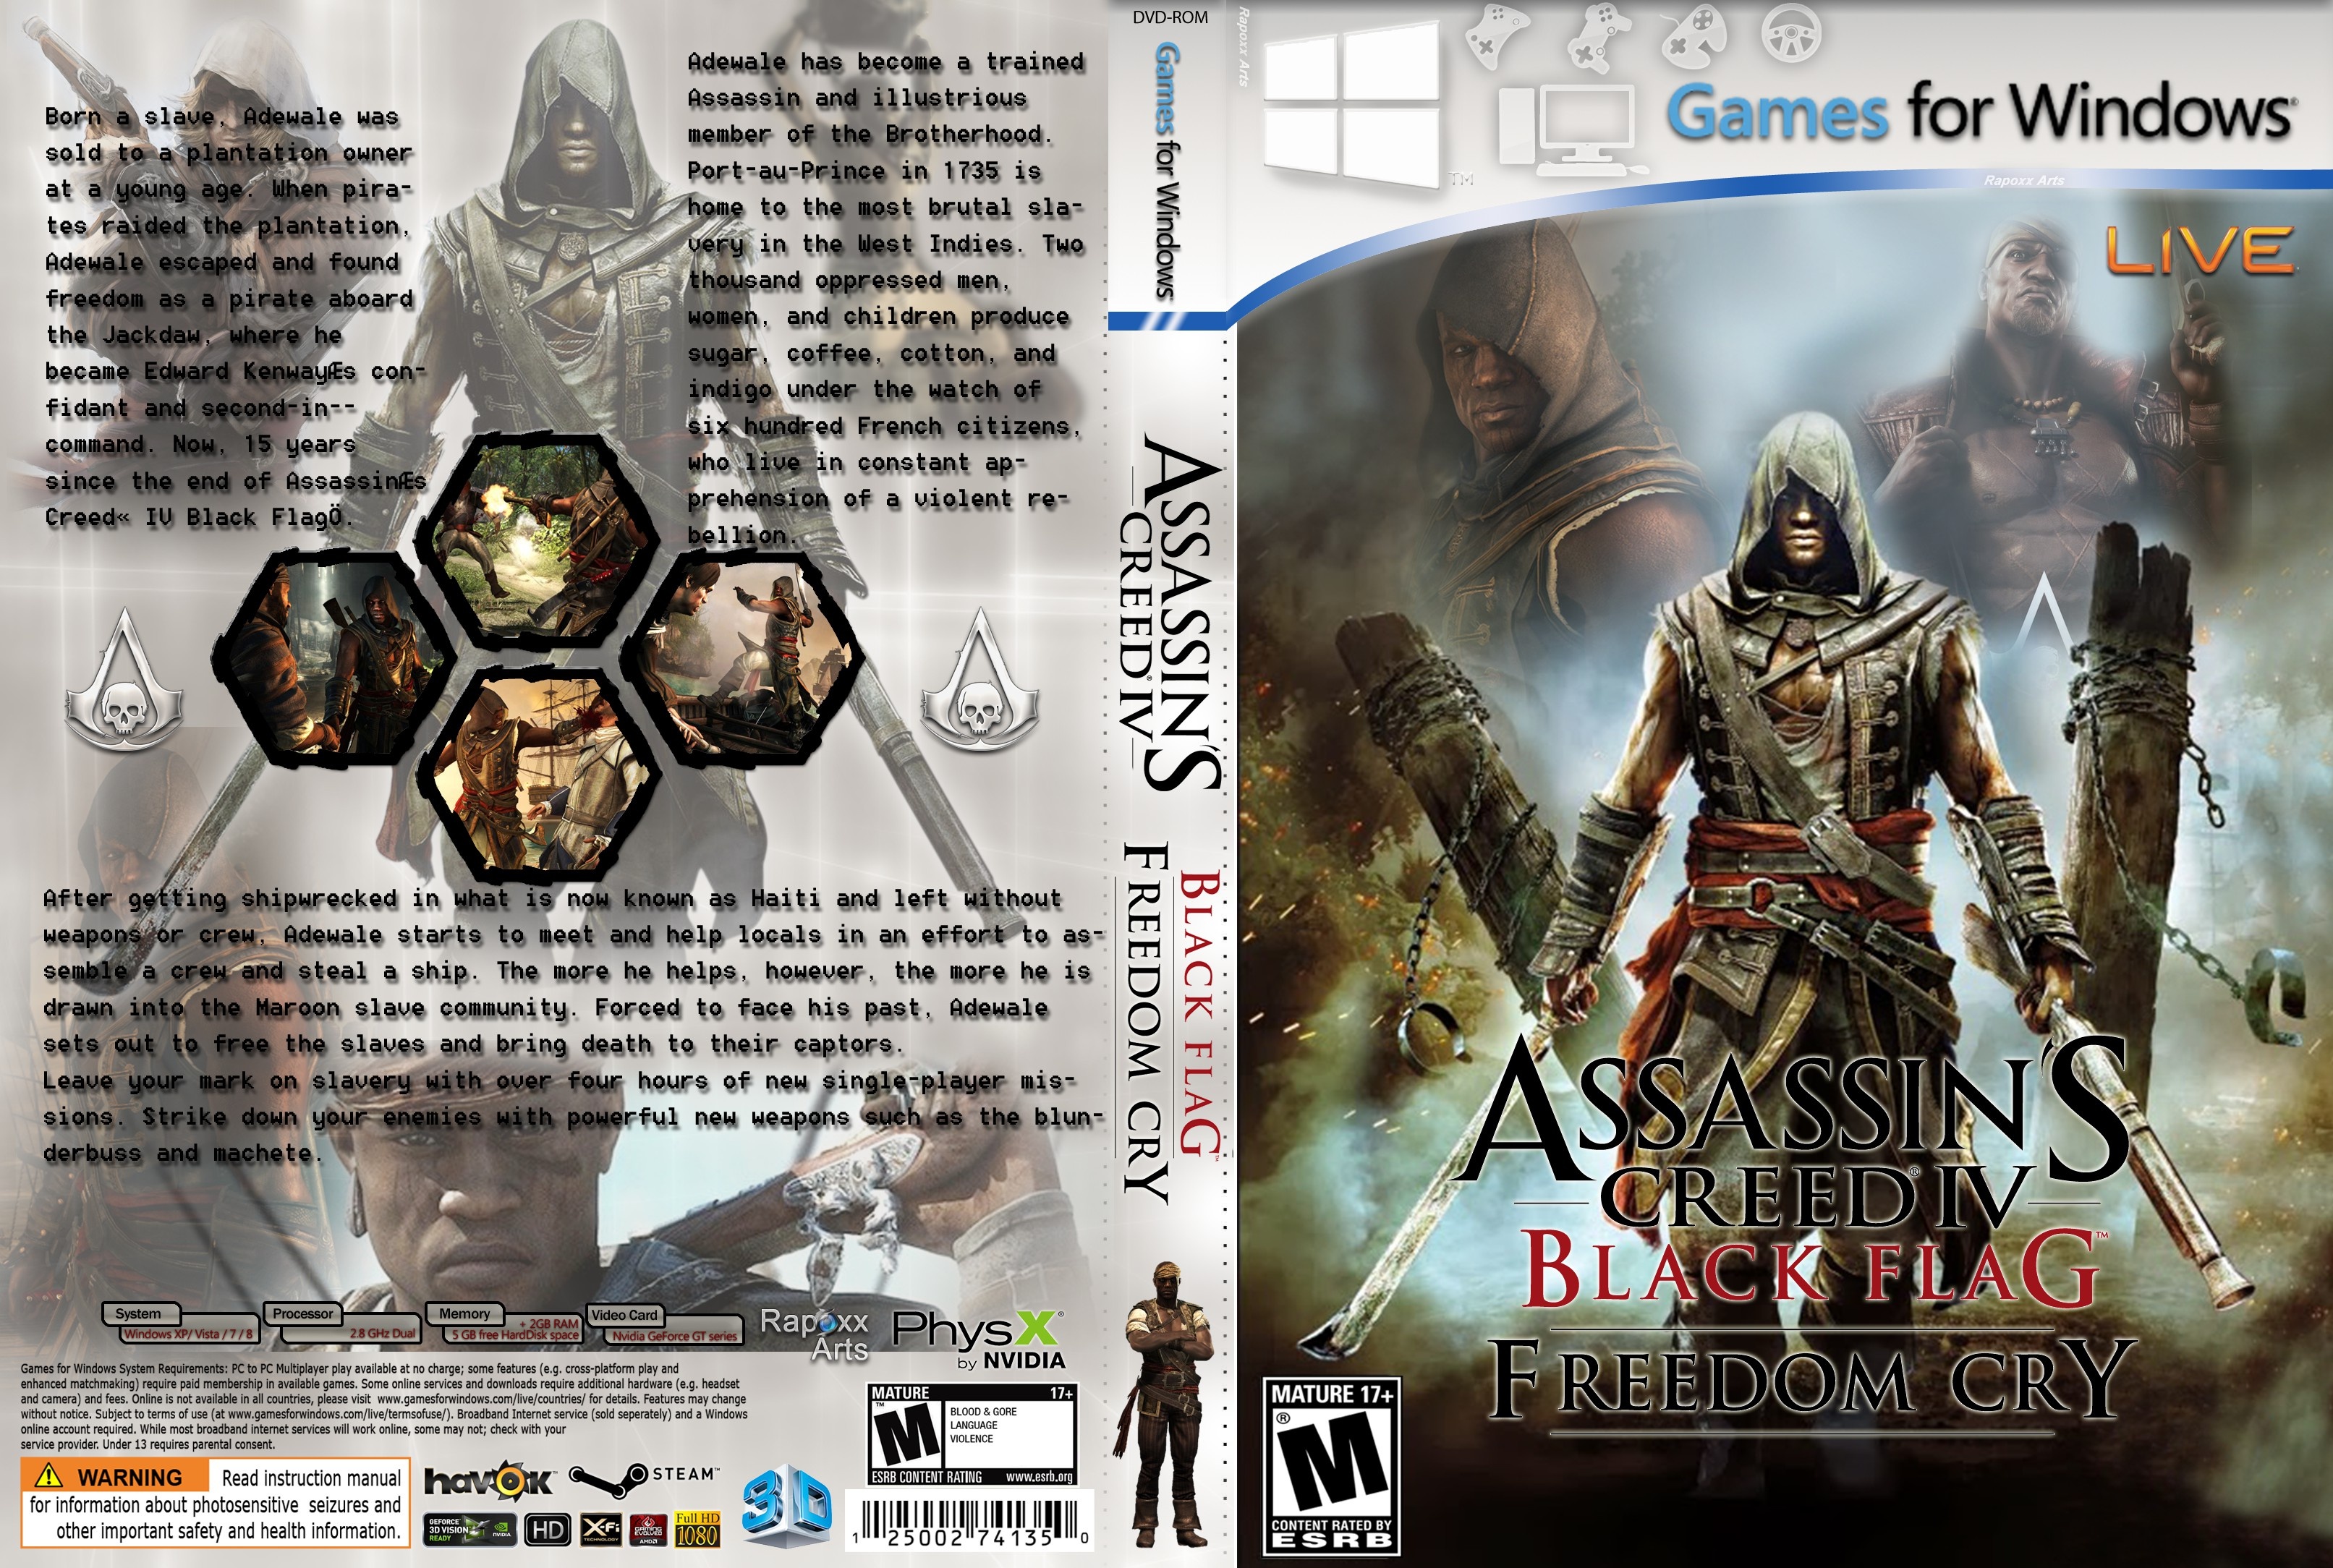 Assassin's Creed IV Freedom Cry box cover